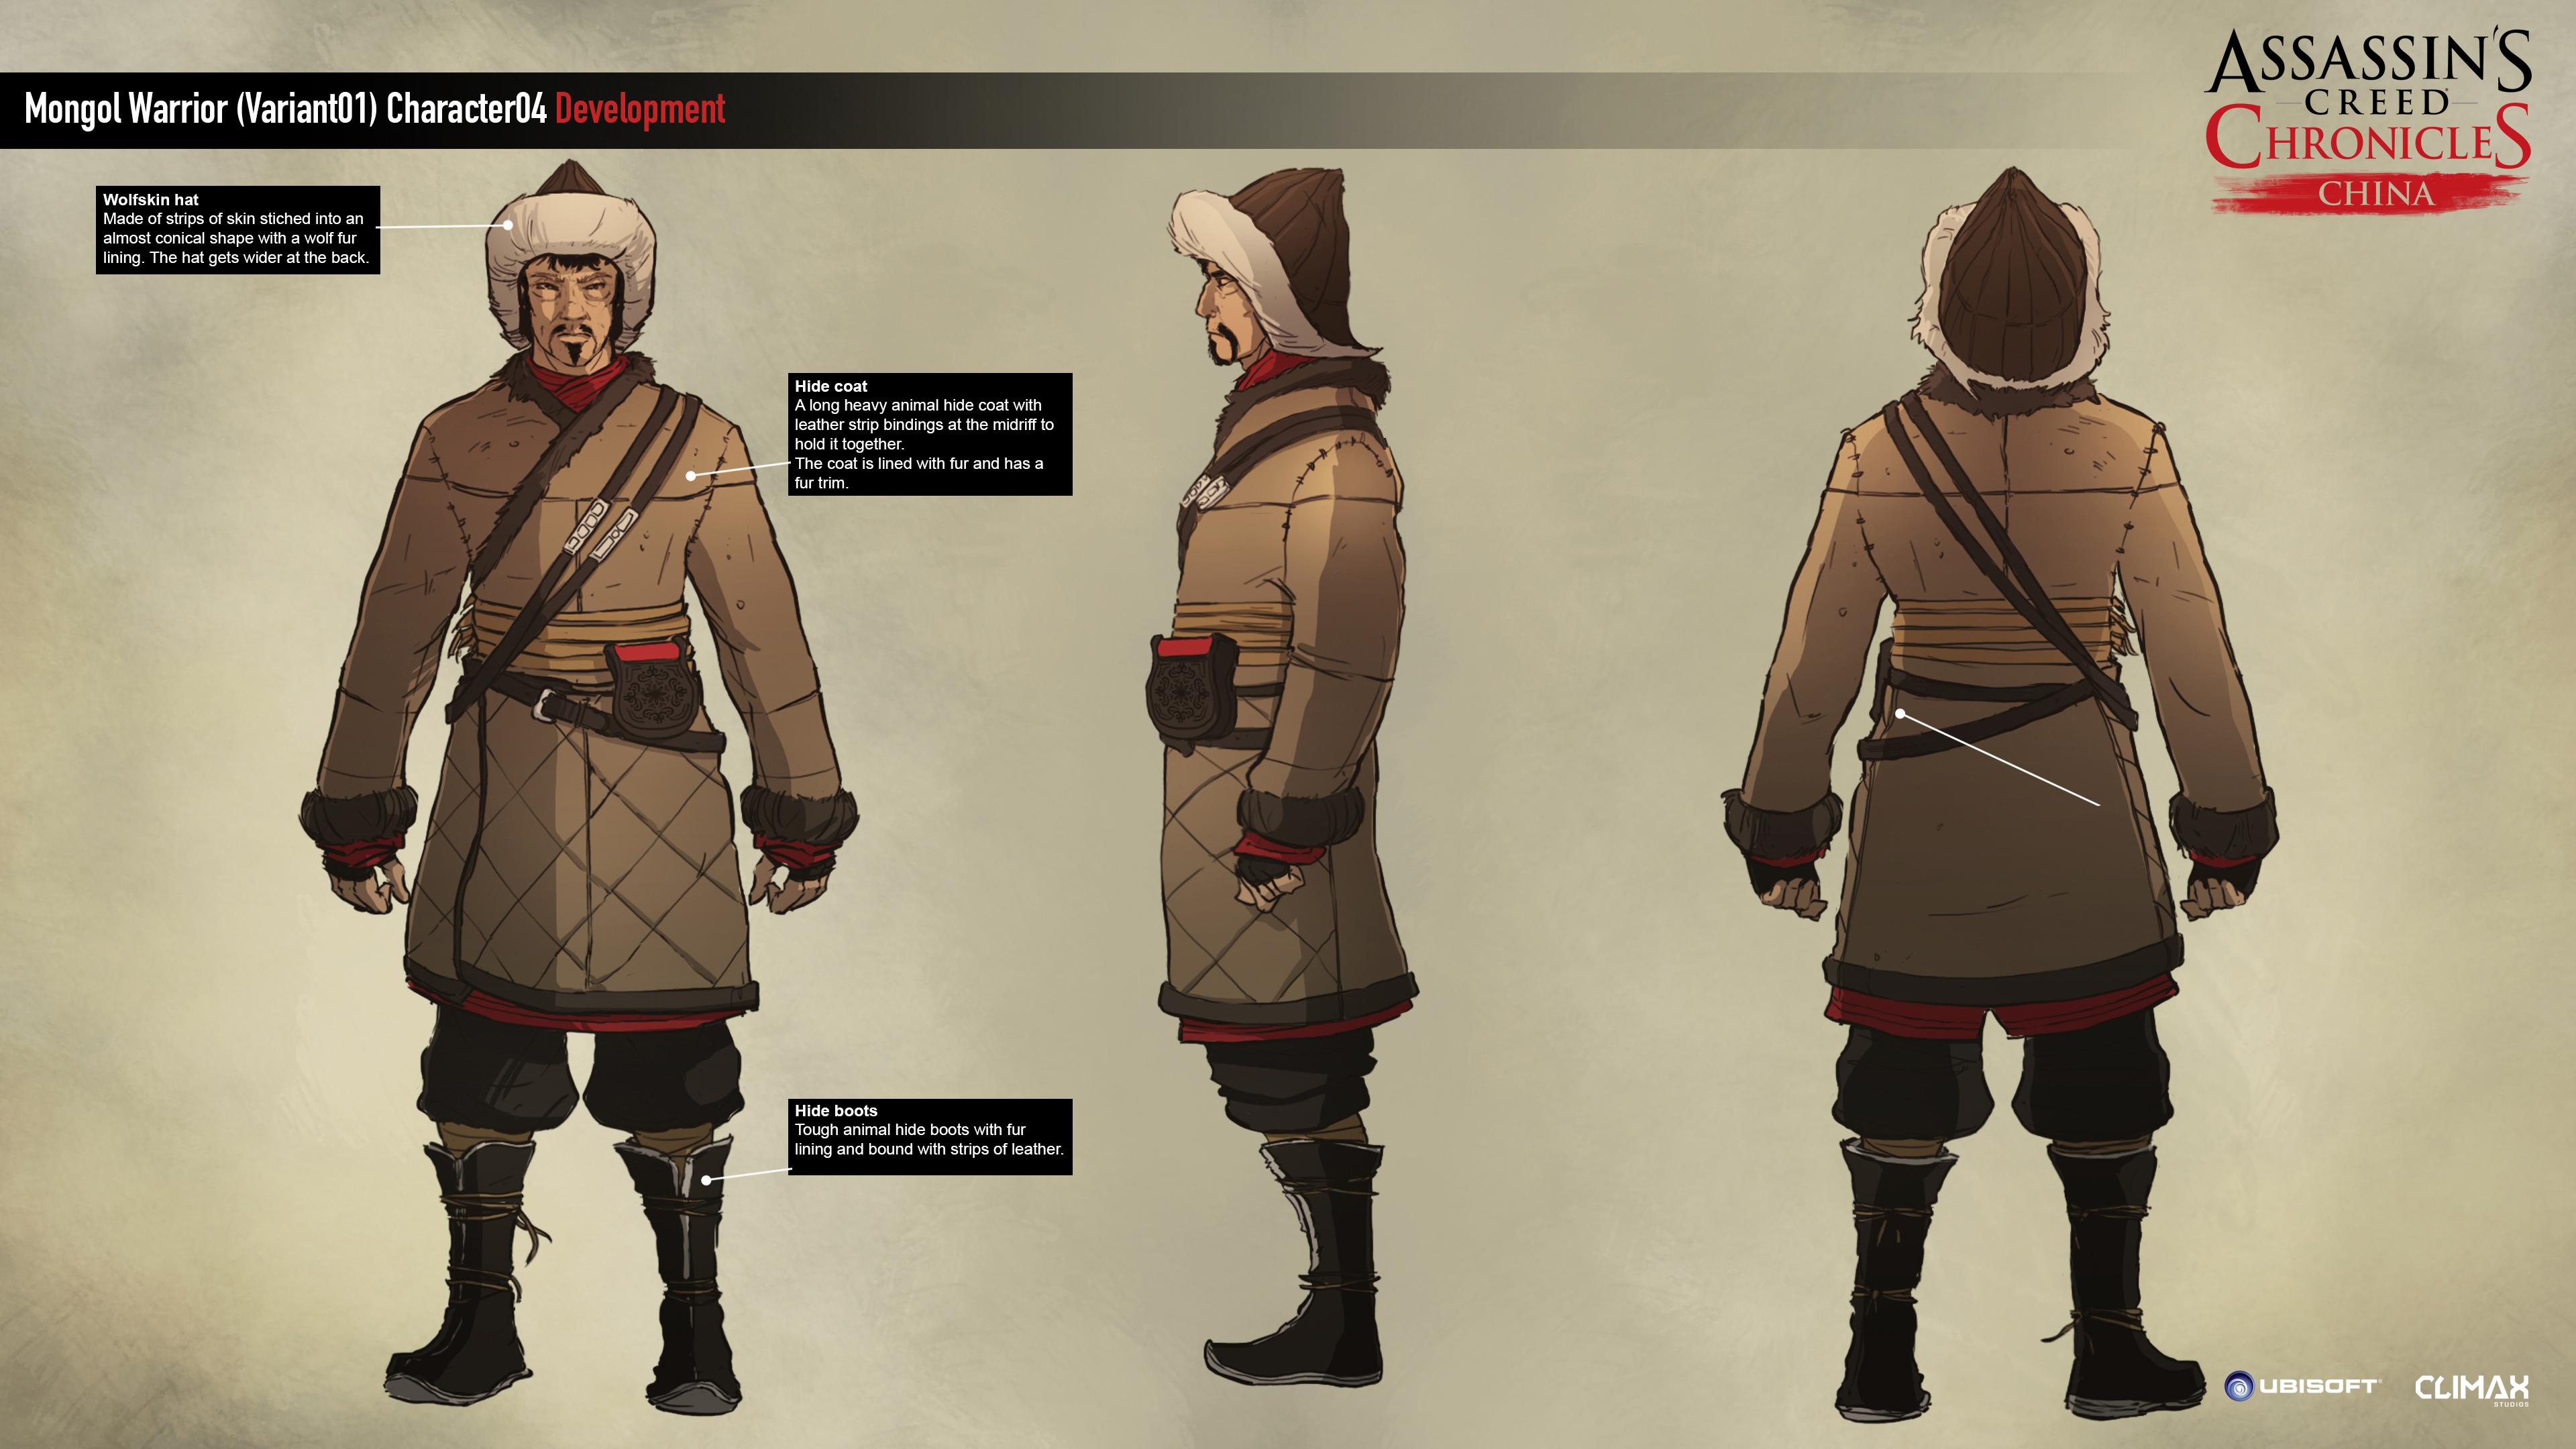 Assassin's Creed Chronicles: China Picture